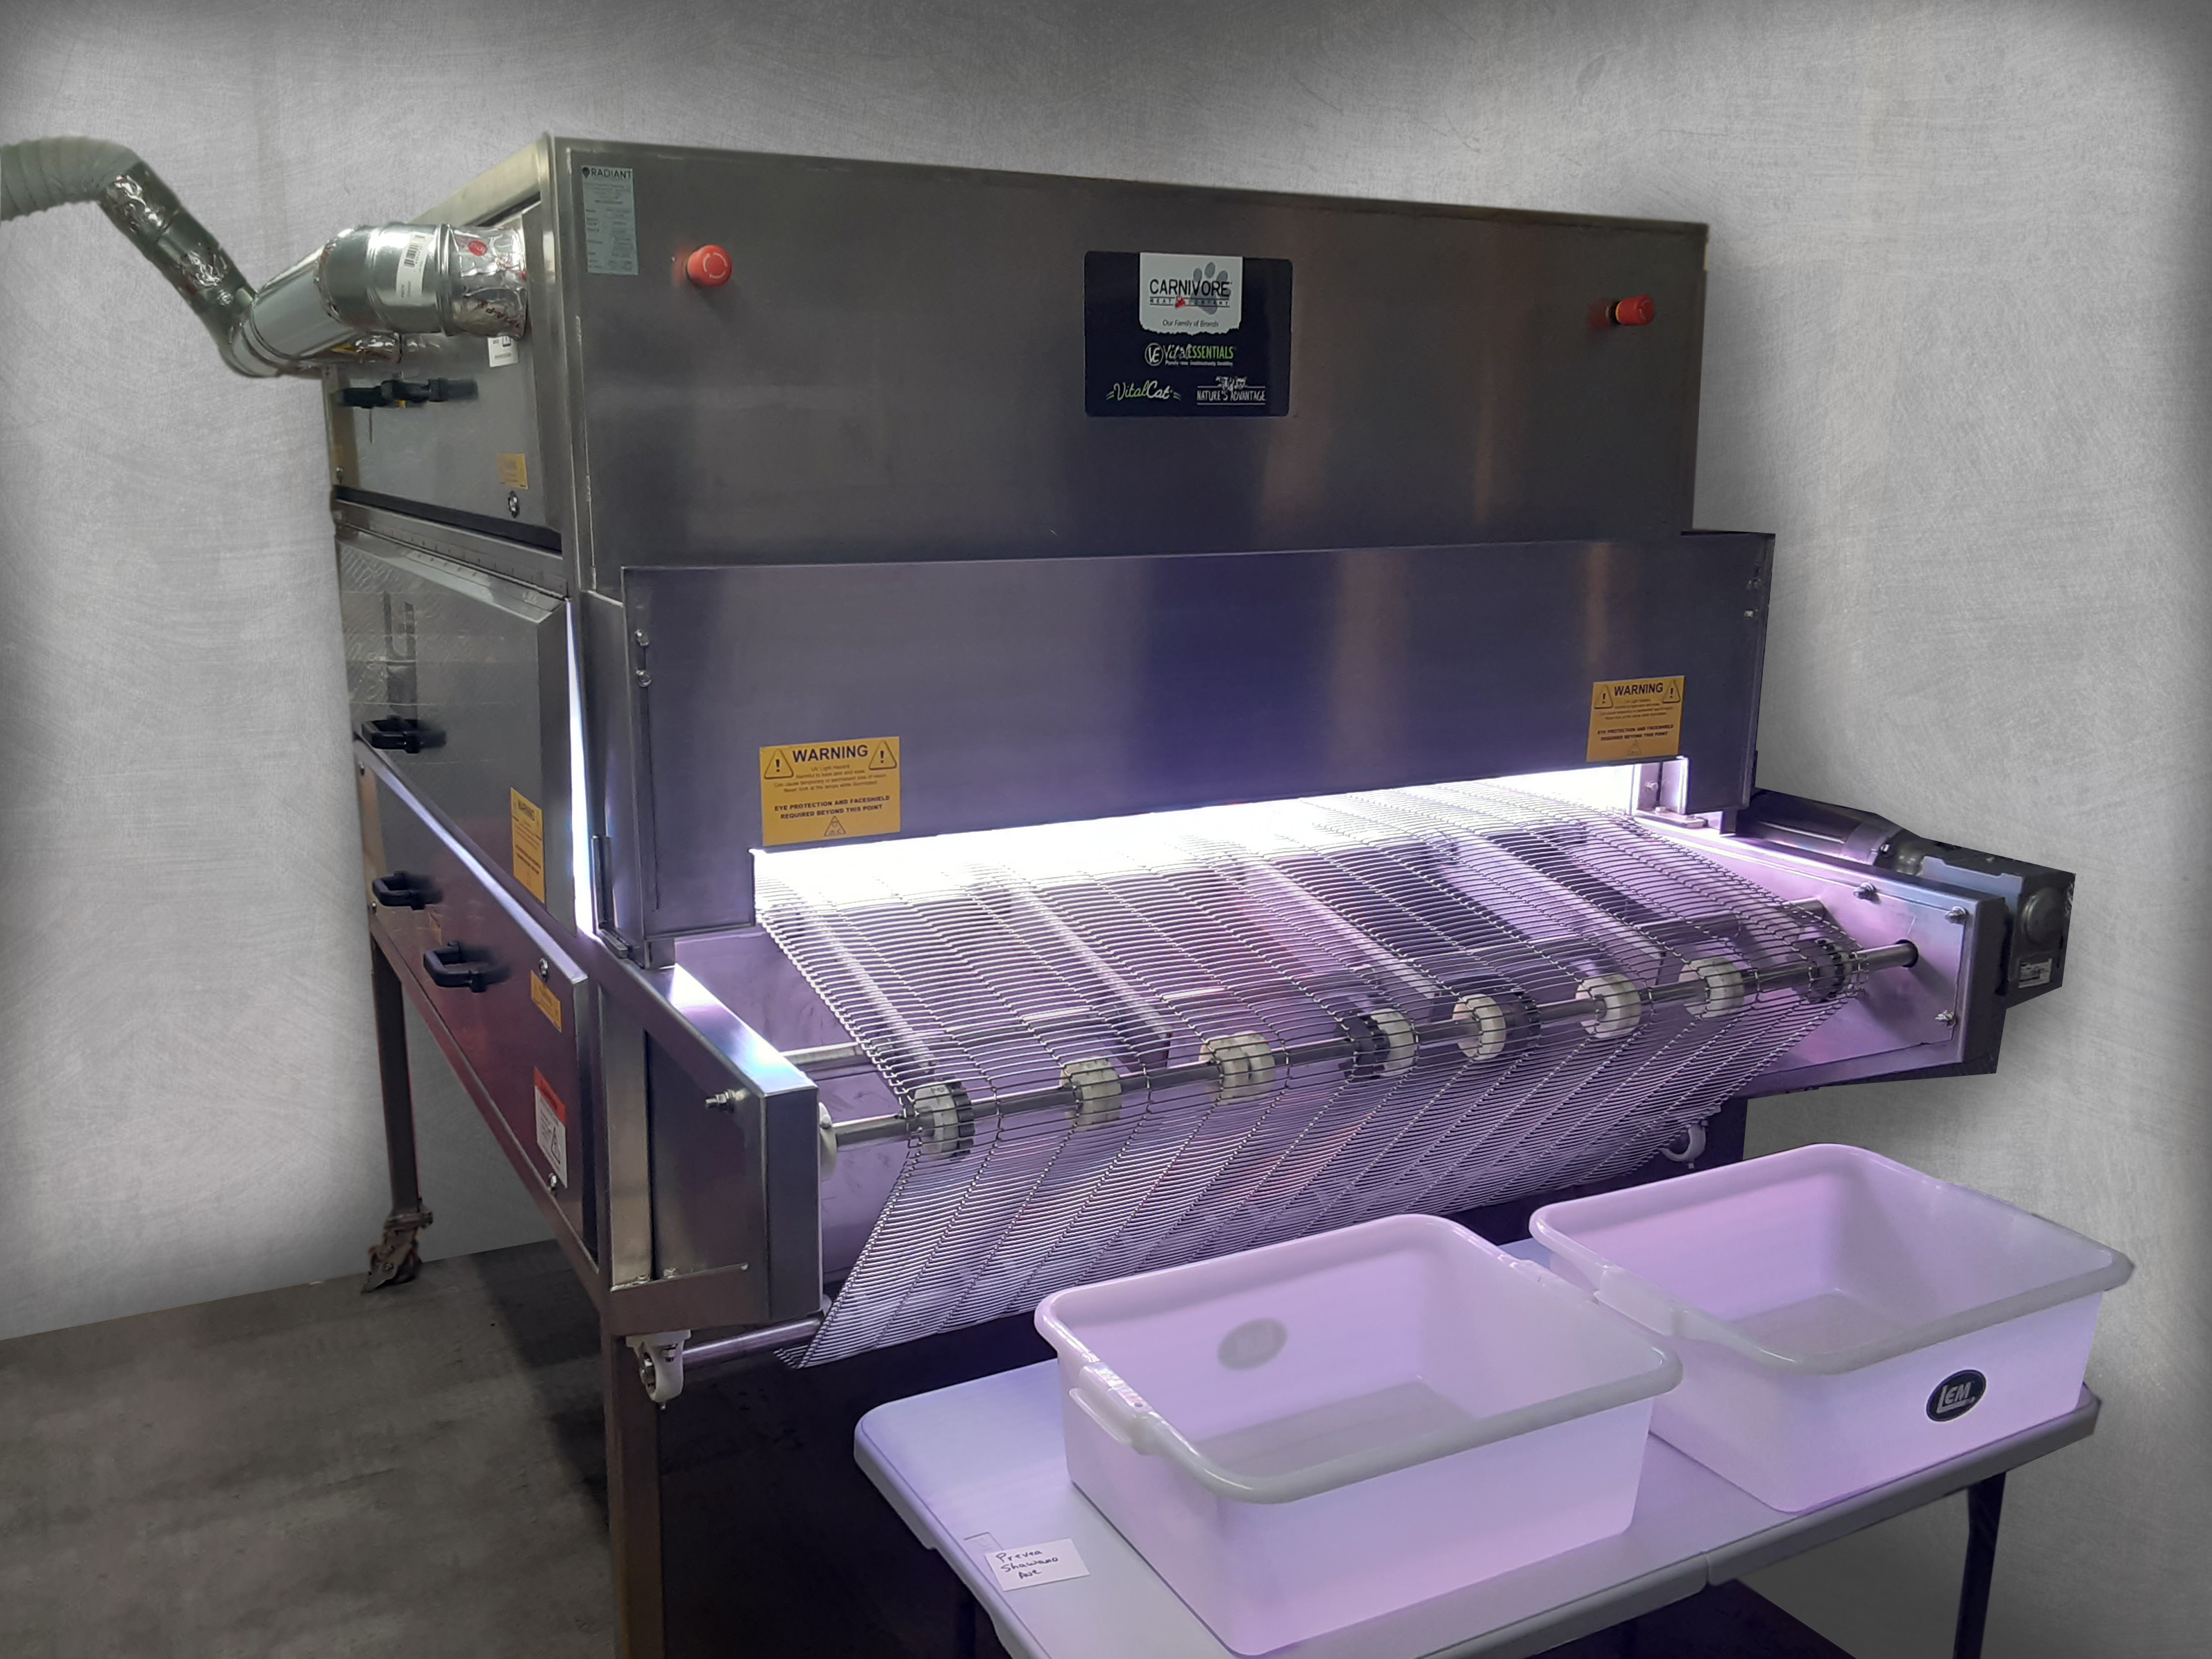 Carnivore Meat Company Donates UV Equipment to Health Care Systems for Medical Mask Sterilization